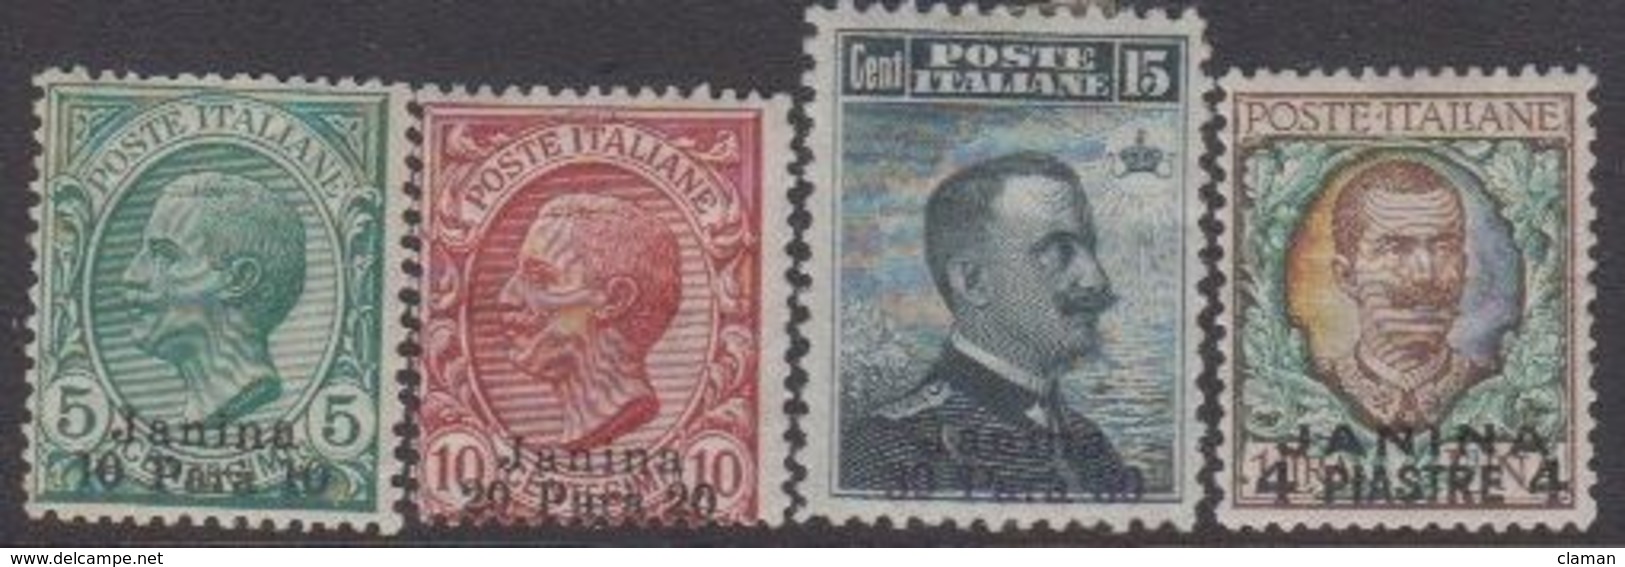 Italy/Italie 1911 (LEVANTE-JANINA) Italian Stamps/Timbres D'Italie (1901-11) Overprinted/Surchargés PARA-PIASTRE * - General Issues